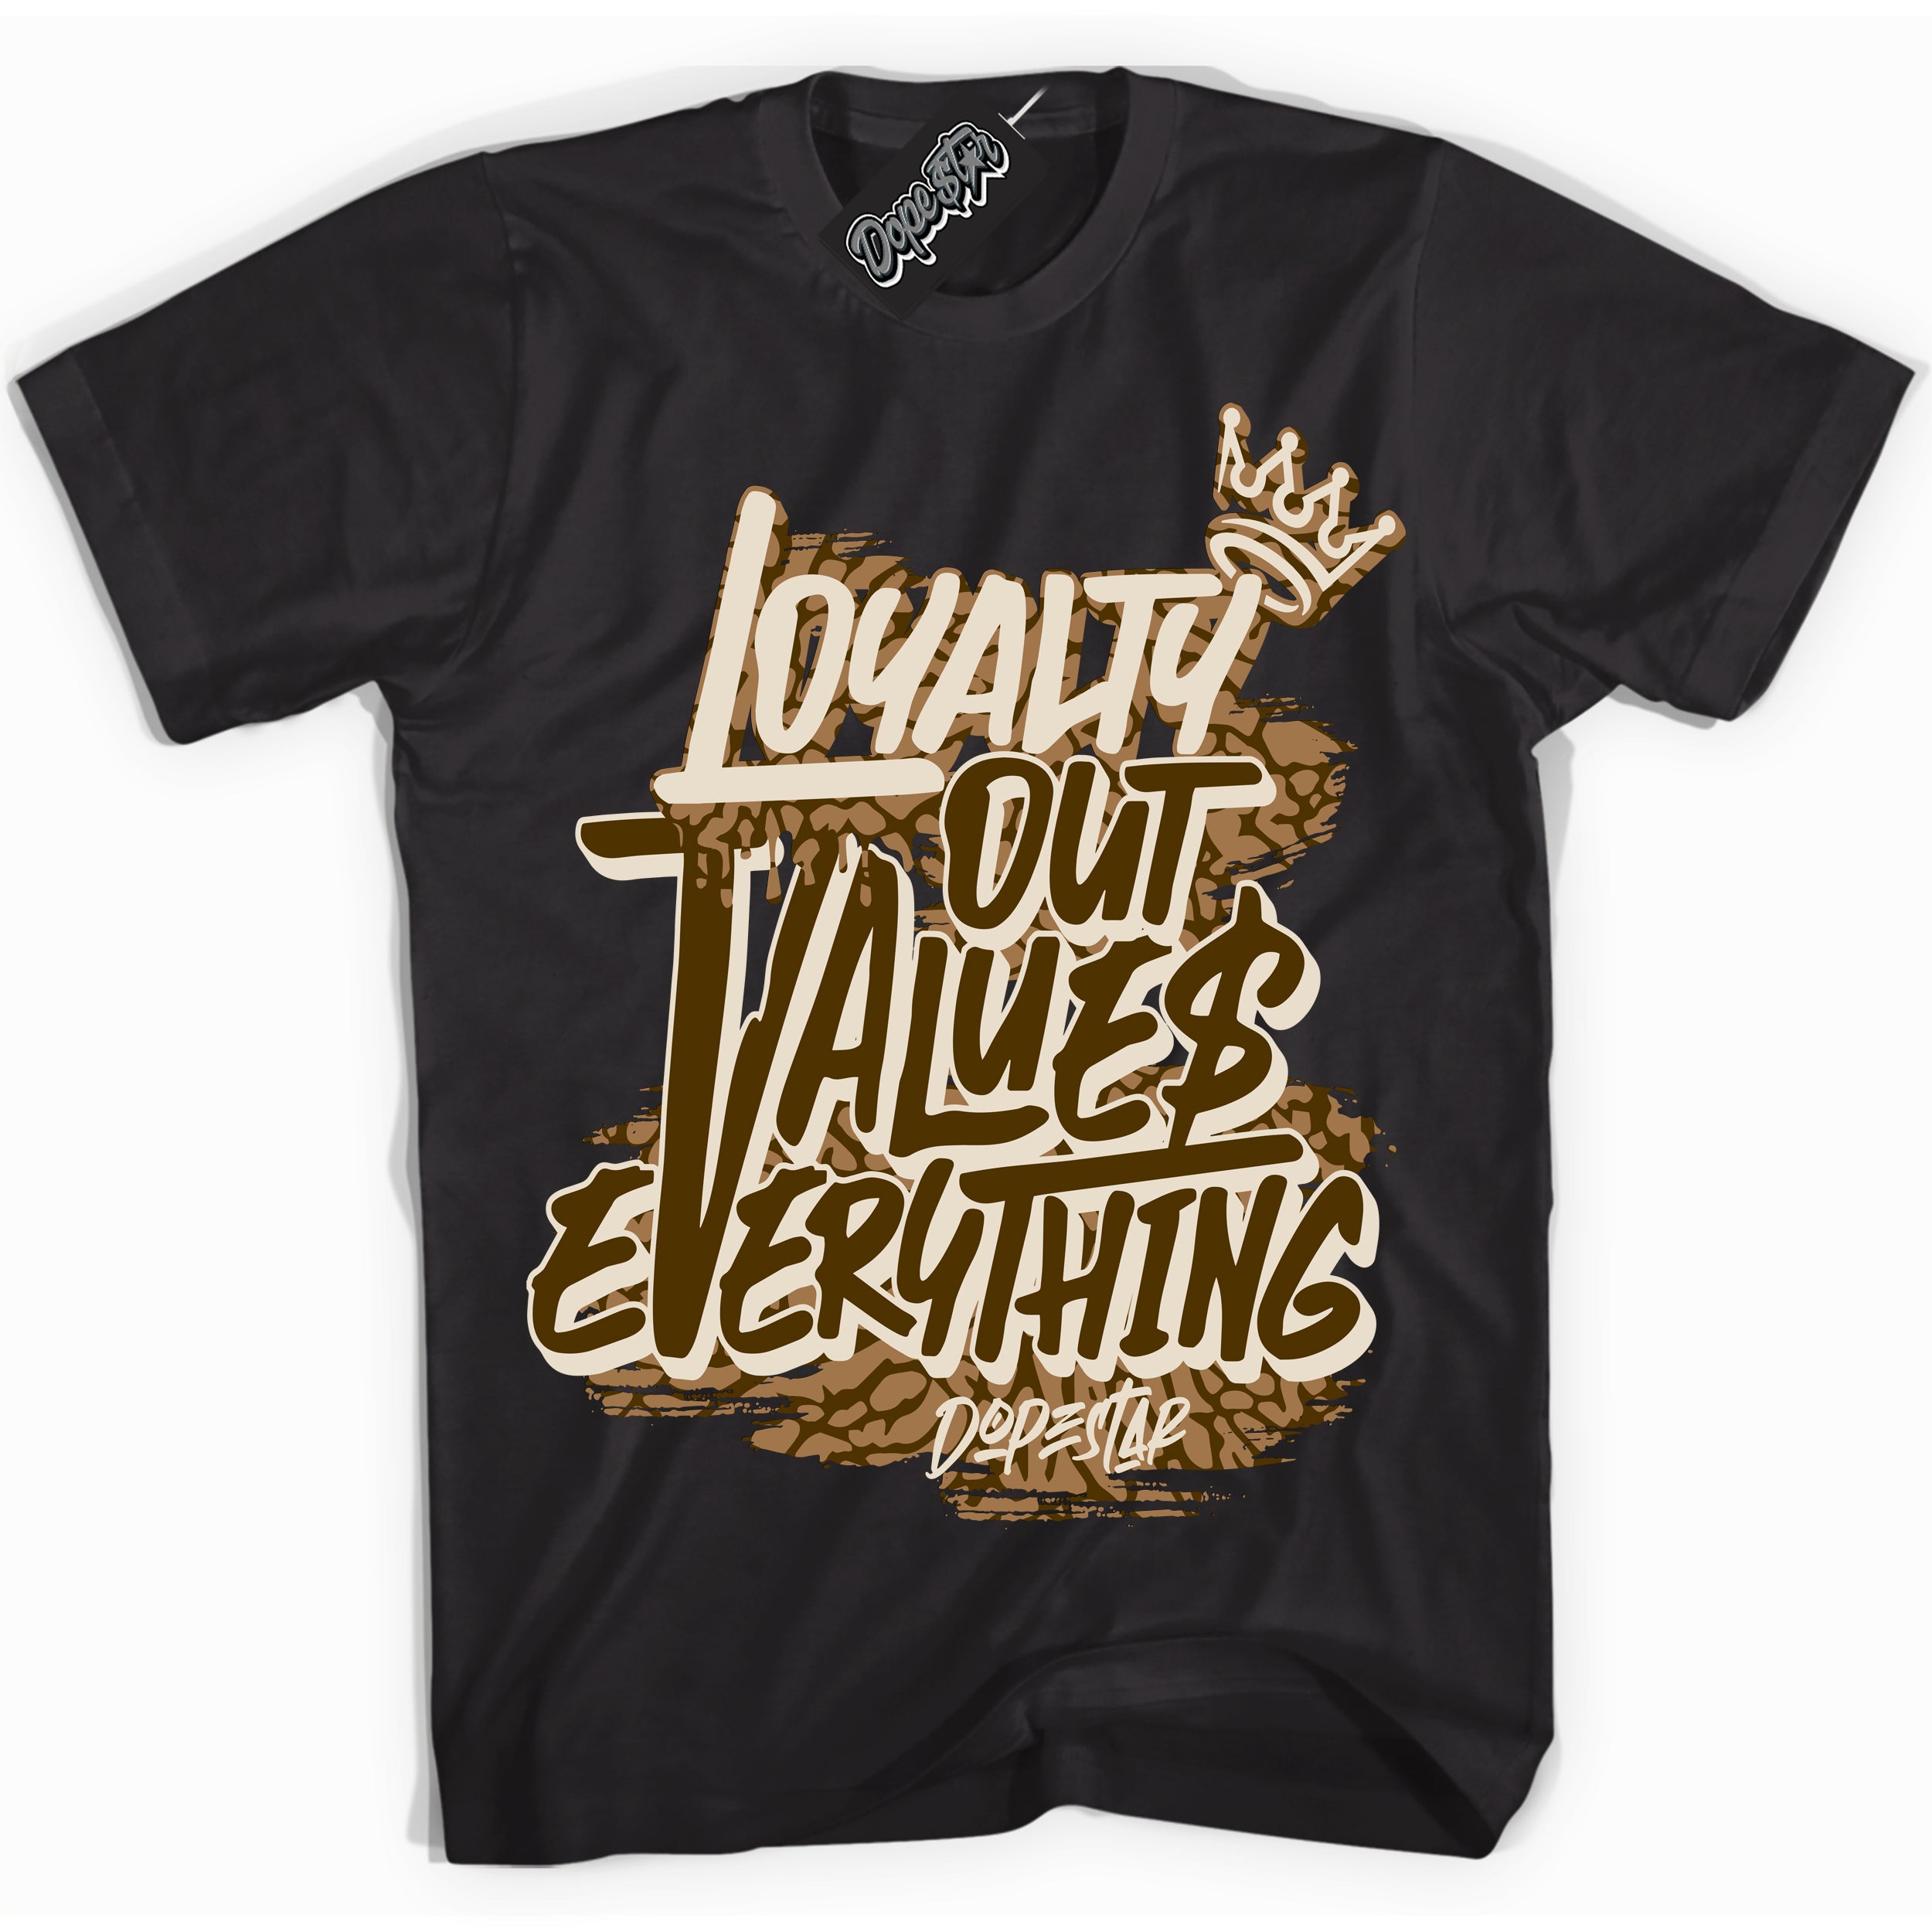 Cool Black Shirt with “ Loyalty Out Values Everything” design that perfectly matches Palomino 3s Sneakers.